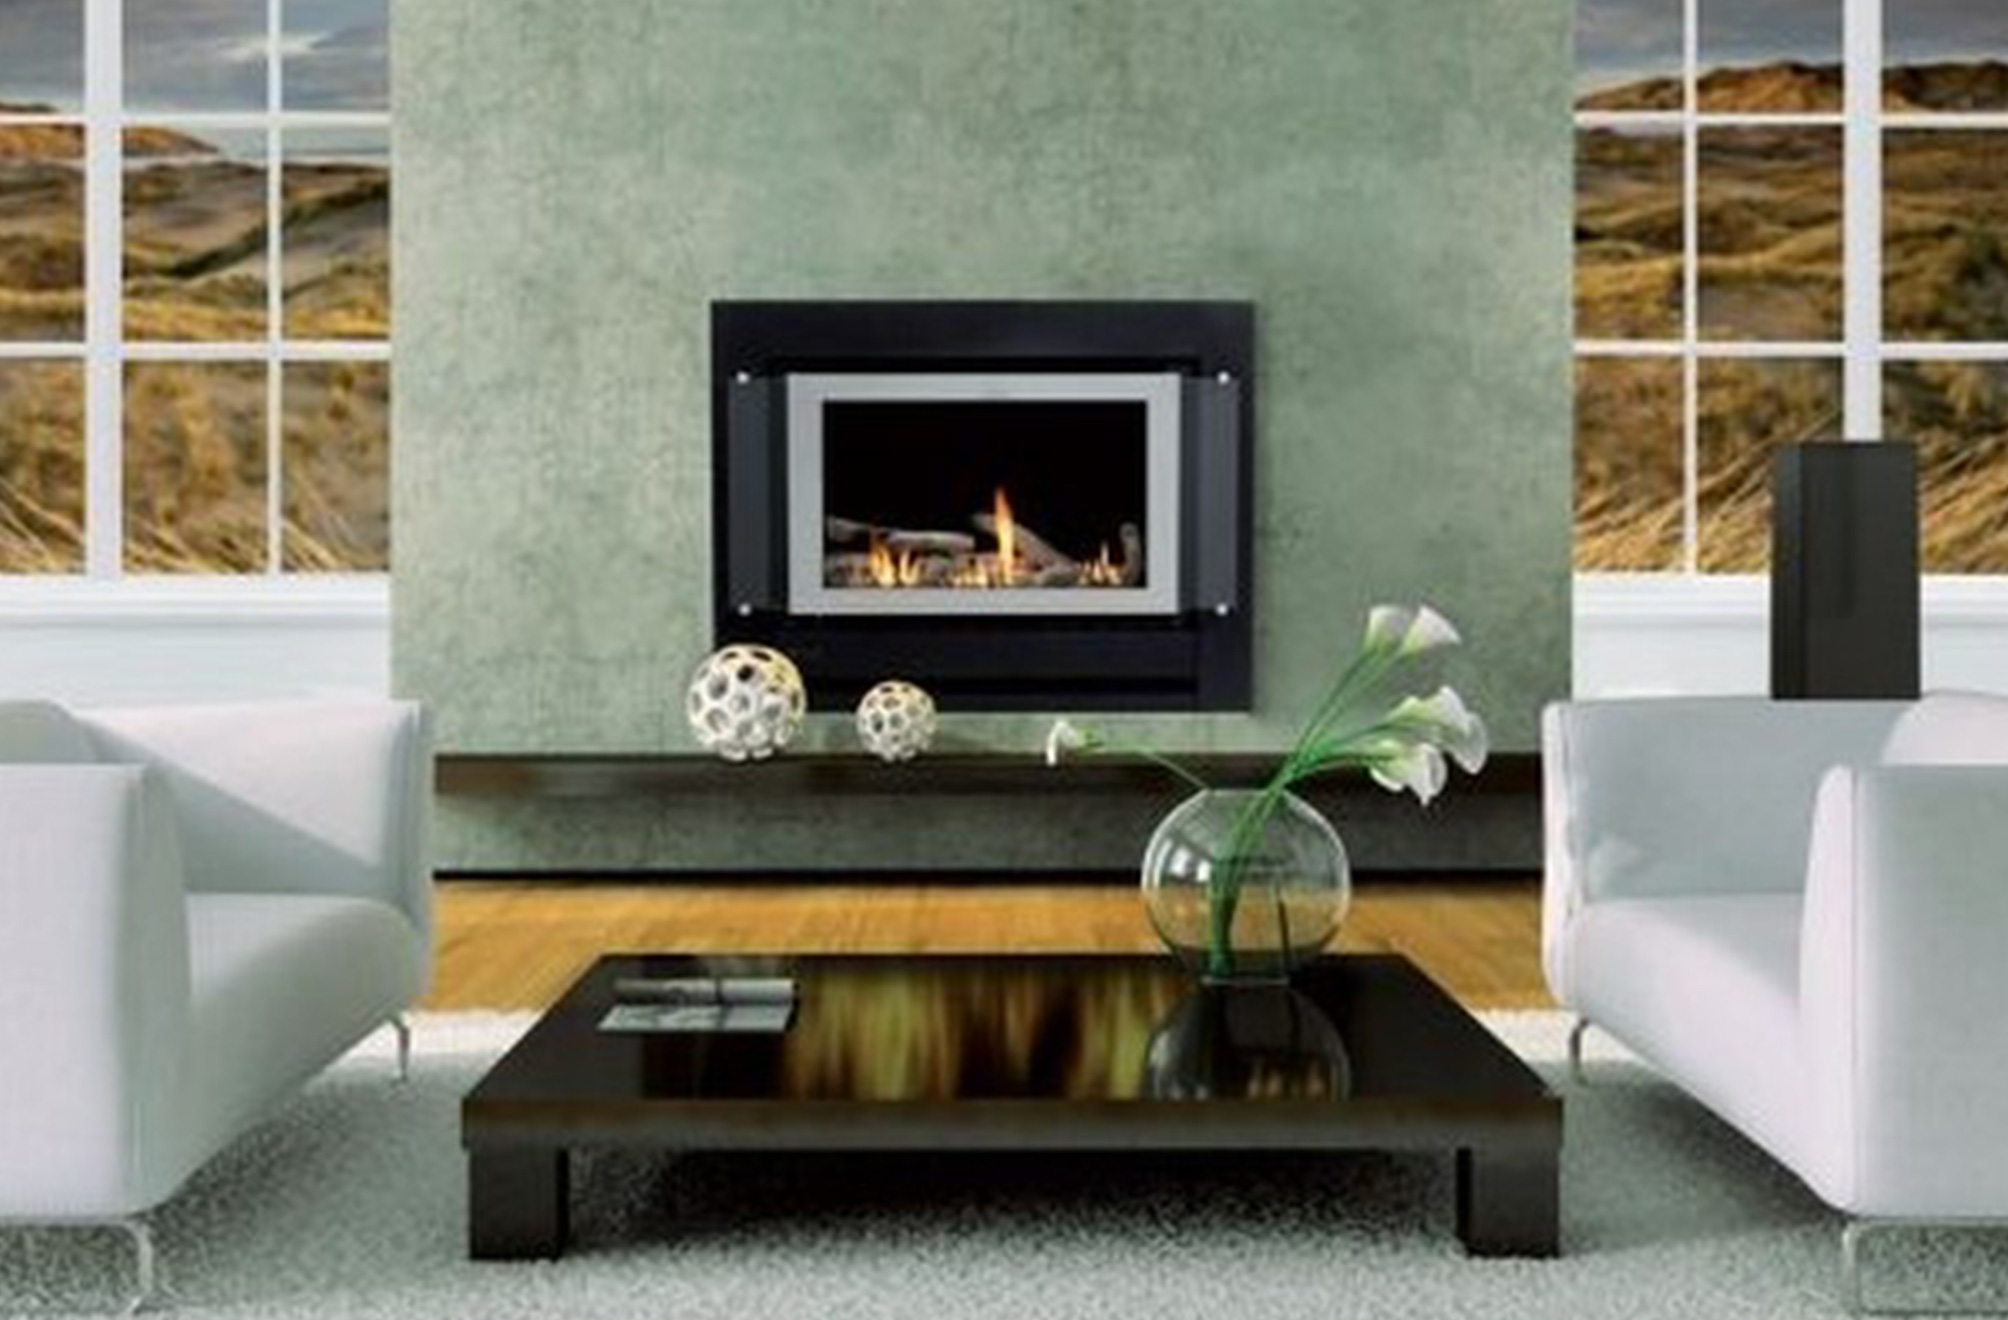 Neo inbuilt black outer and stainless inner with hearth lifestyle image